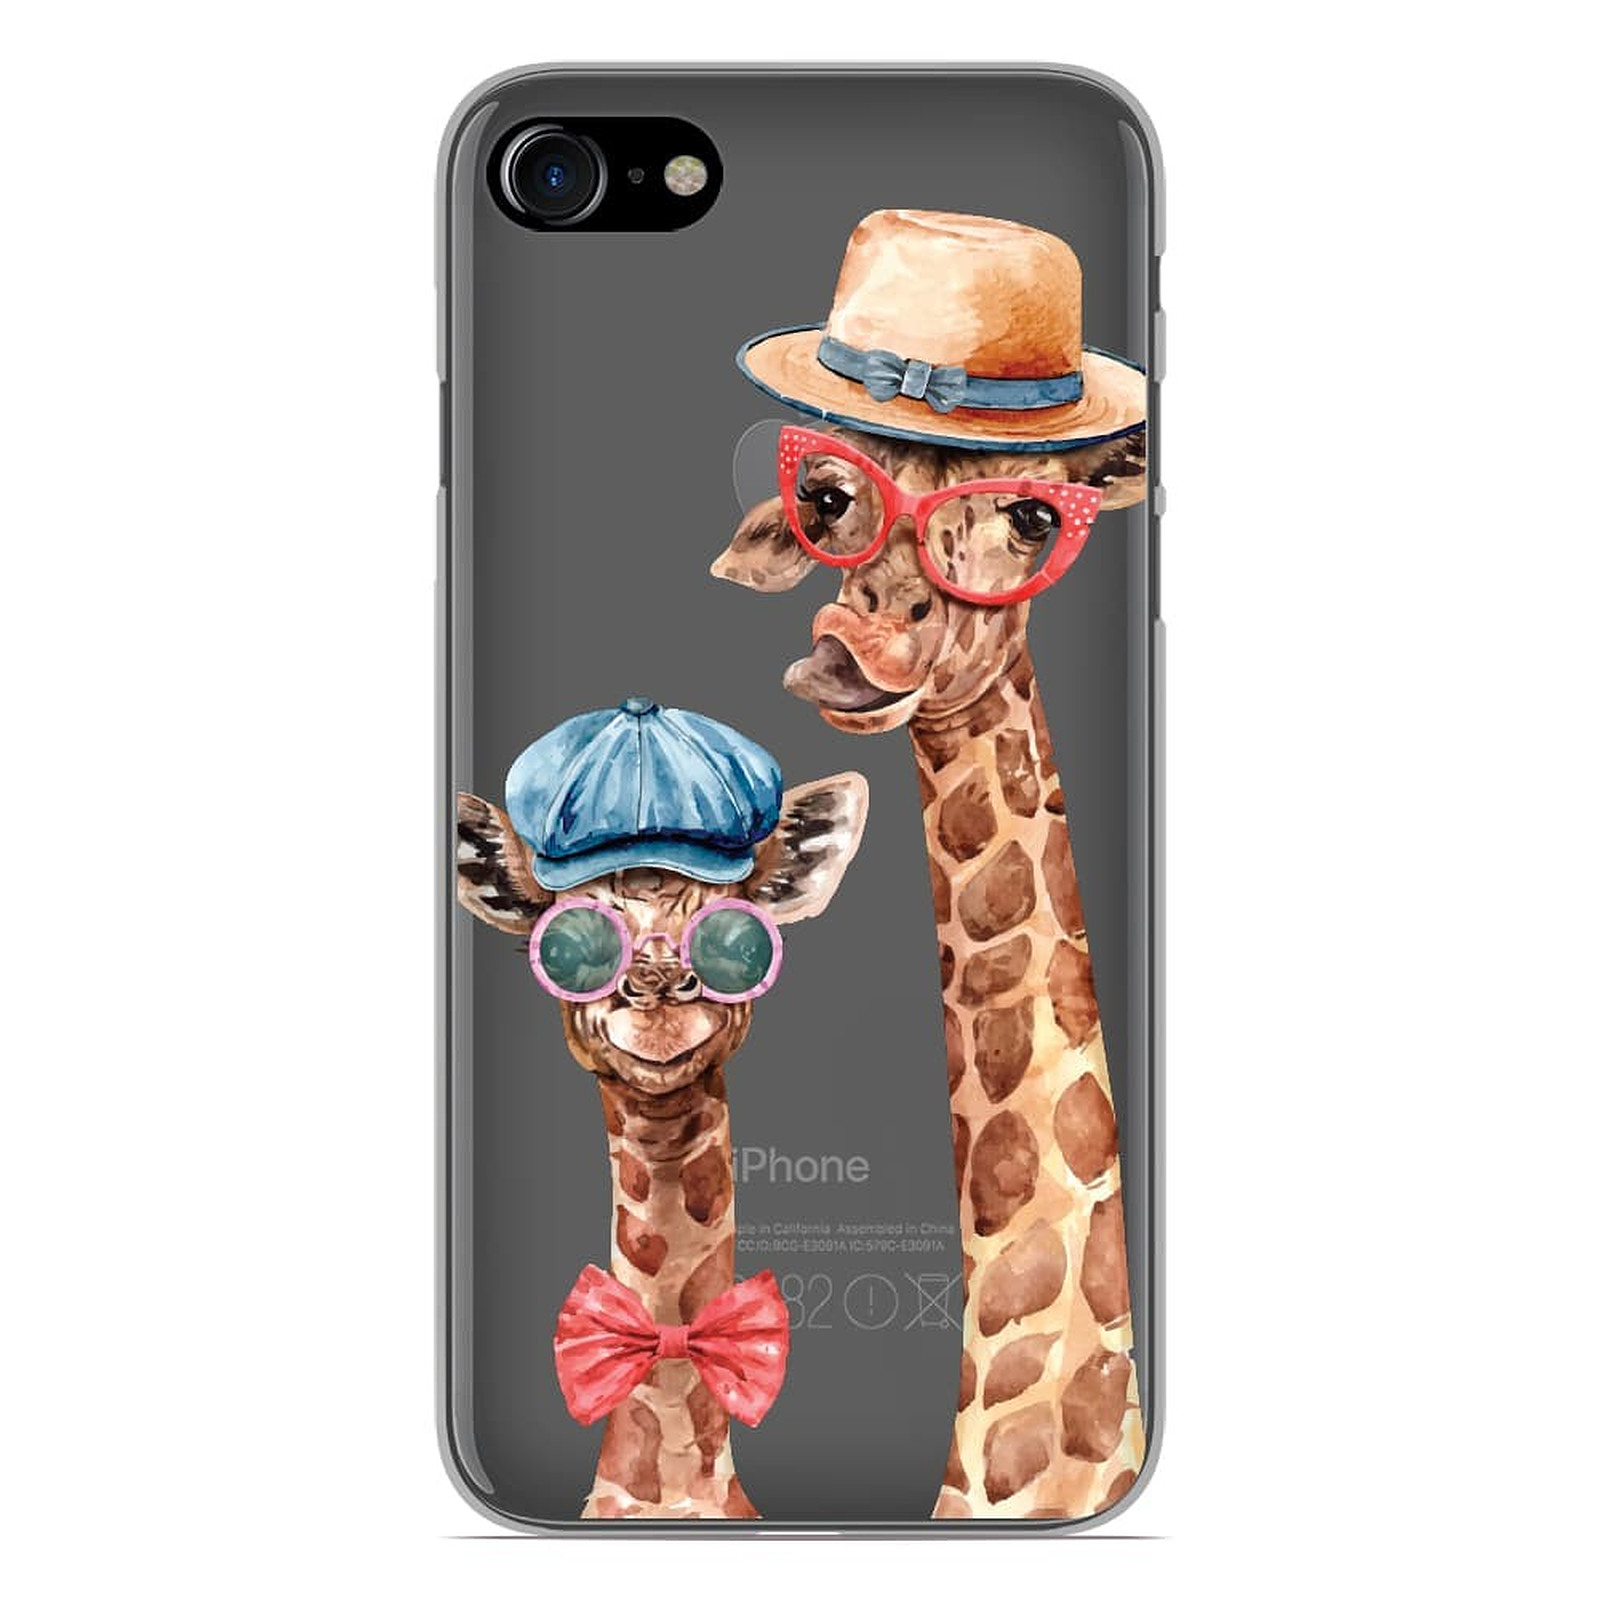 1001 Coques Coque silicone gel Apple iPhone 8 motif Funny Girafe - Coque telephone 1001Coques